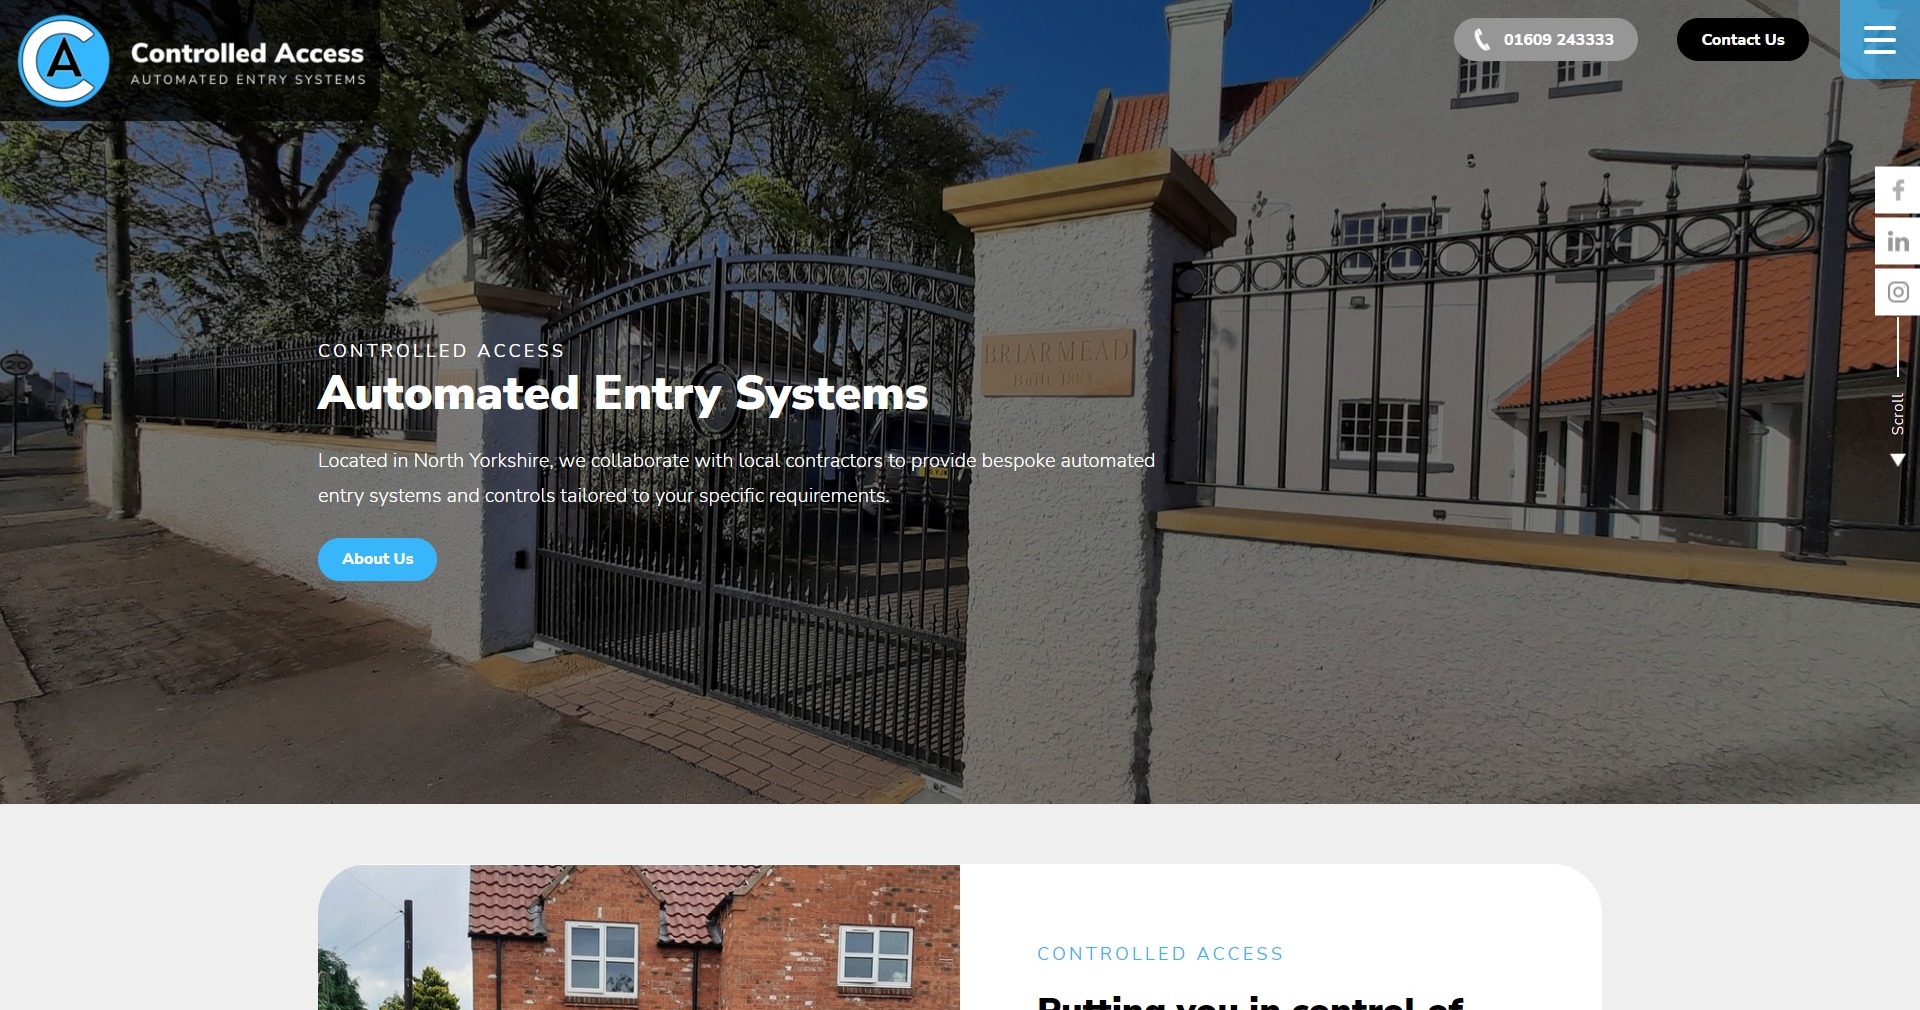 Controlled Access automated entry system website